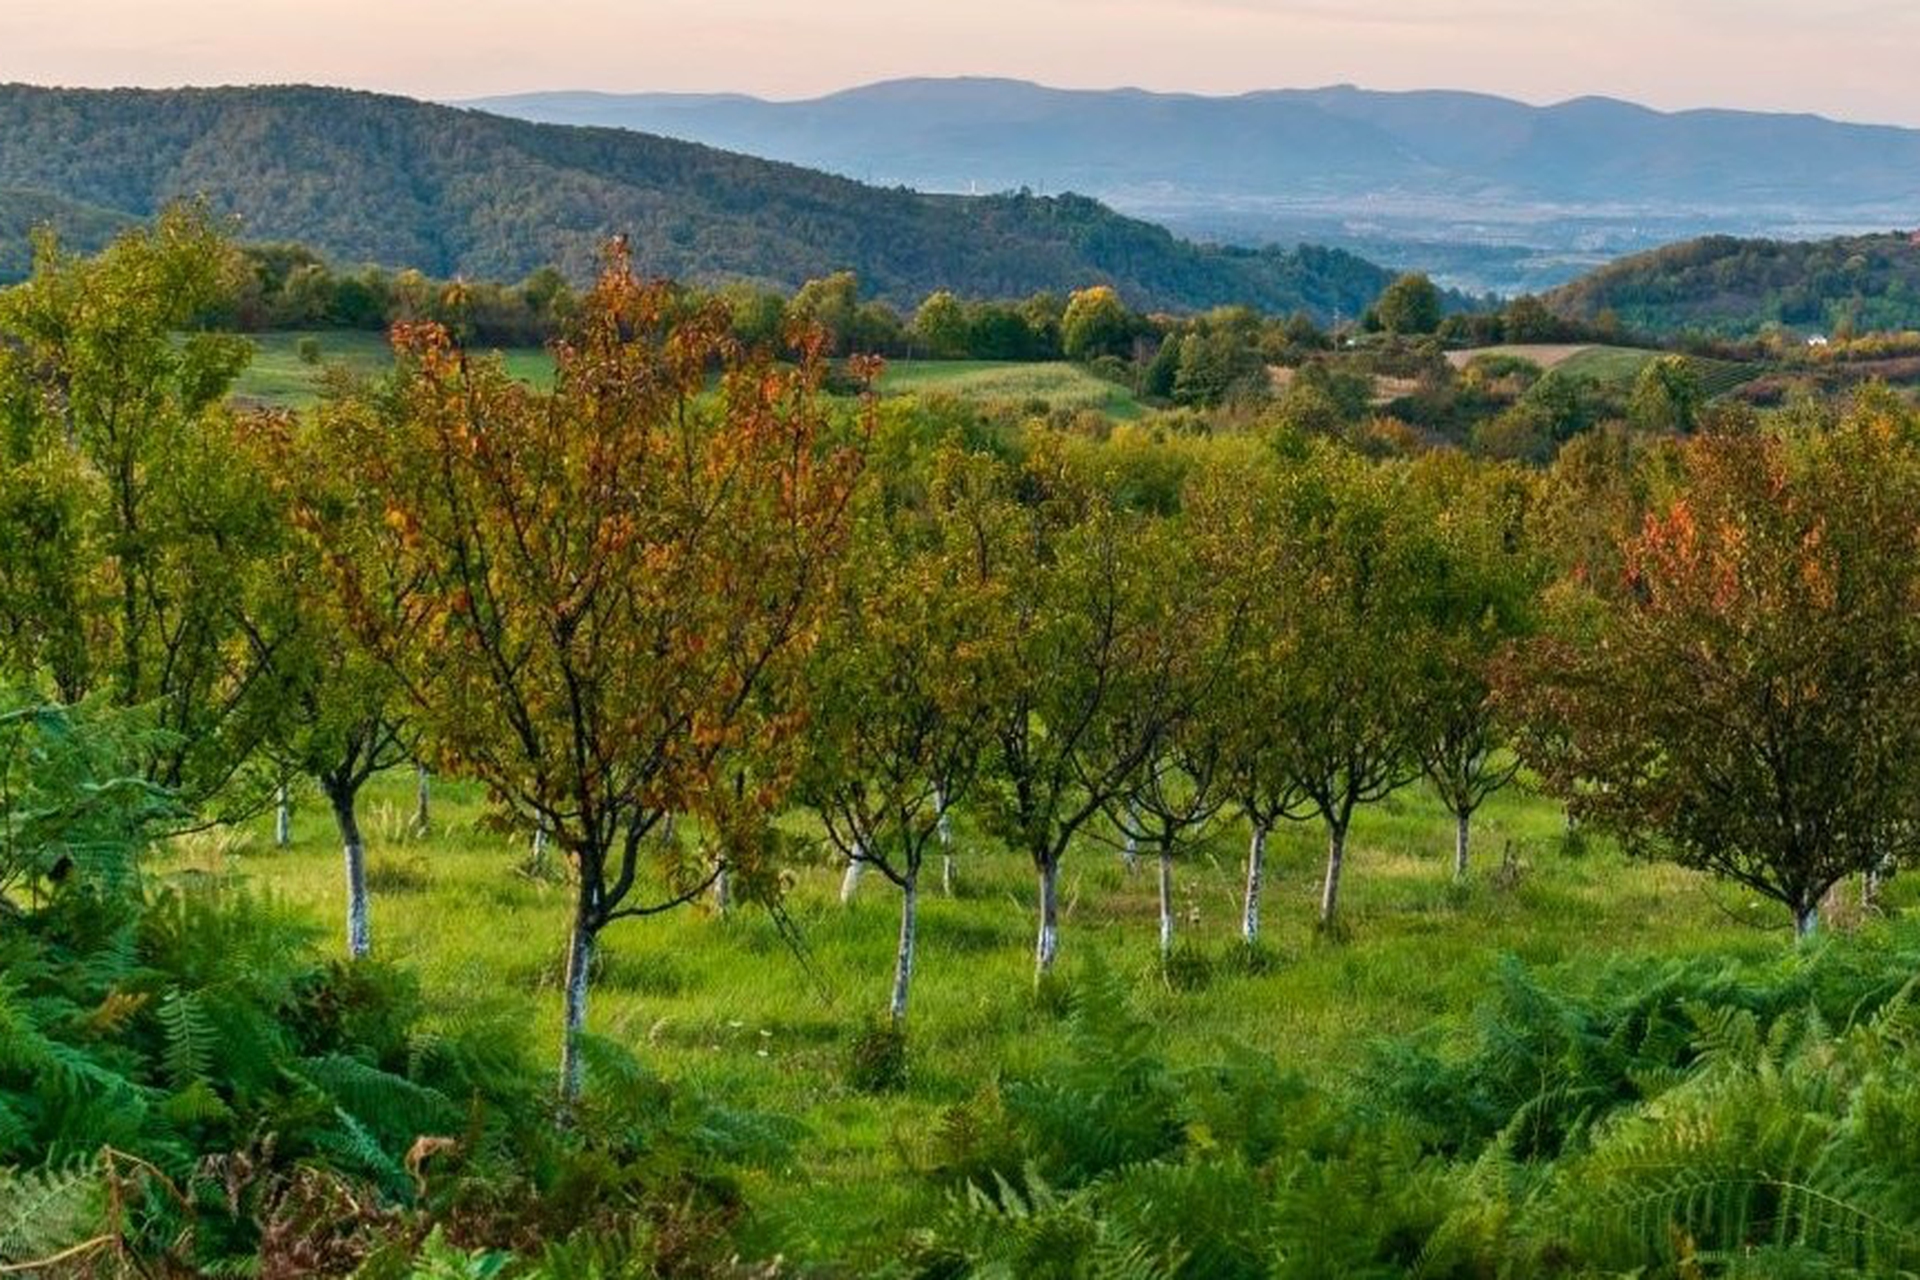 Traditional orchards are our past and future. Promoting biodiversity